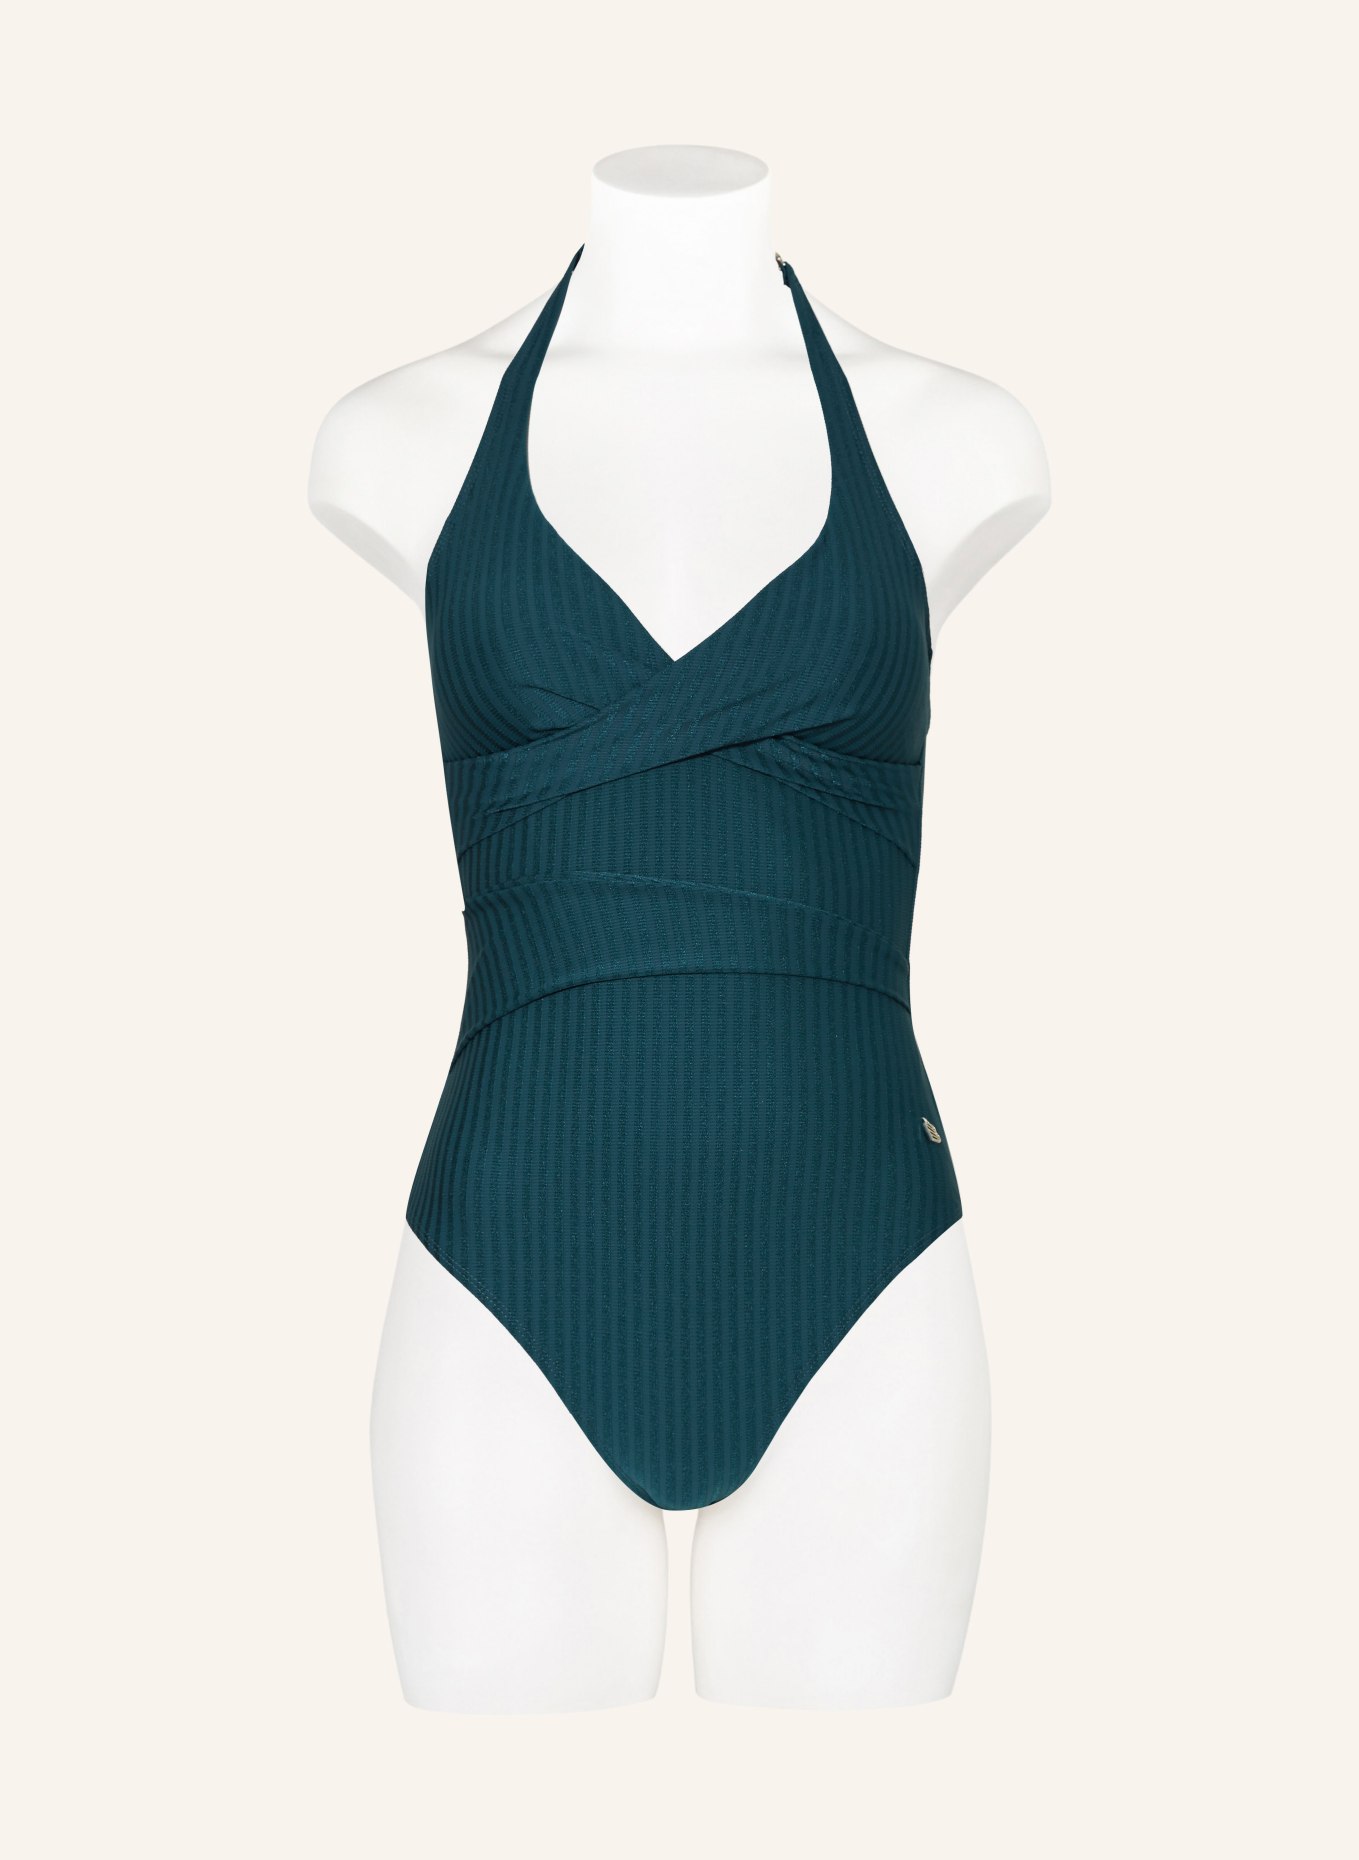 BEACHLIFE Swimsuit REFLECTING POND, Color: TEAL (Image 4)